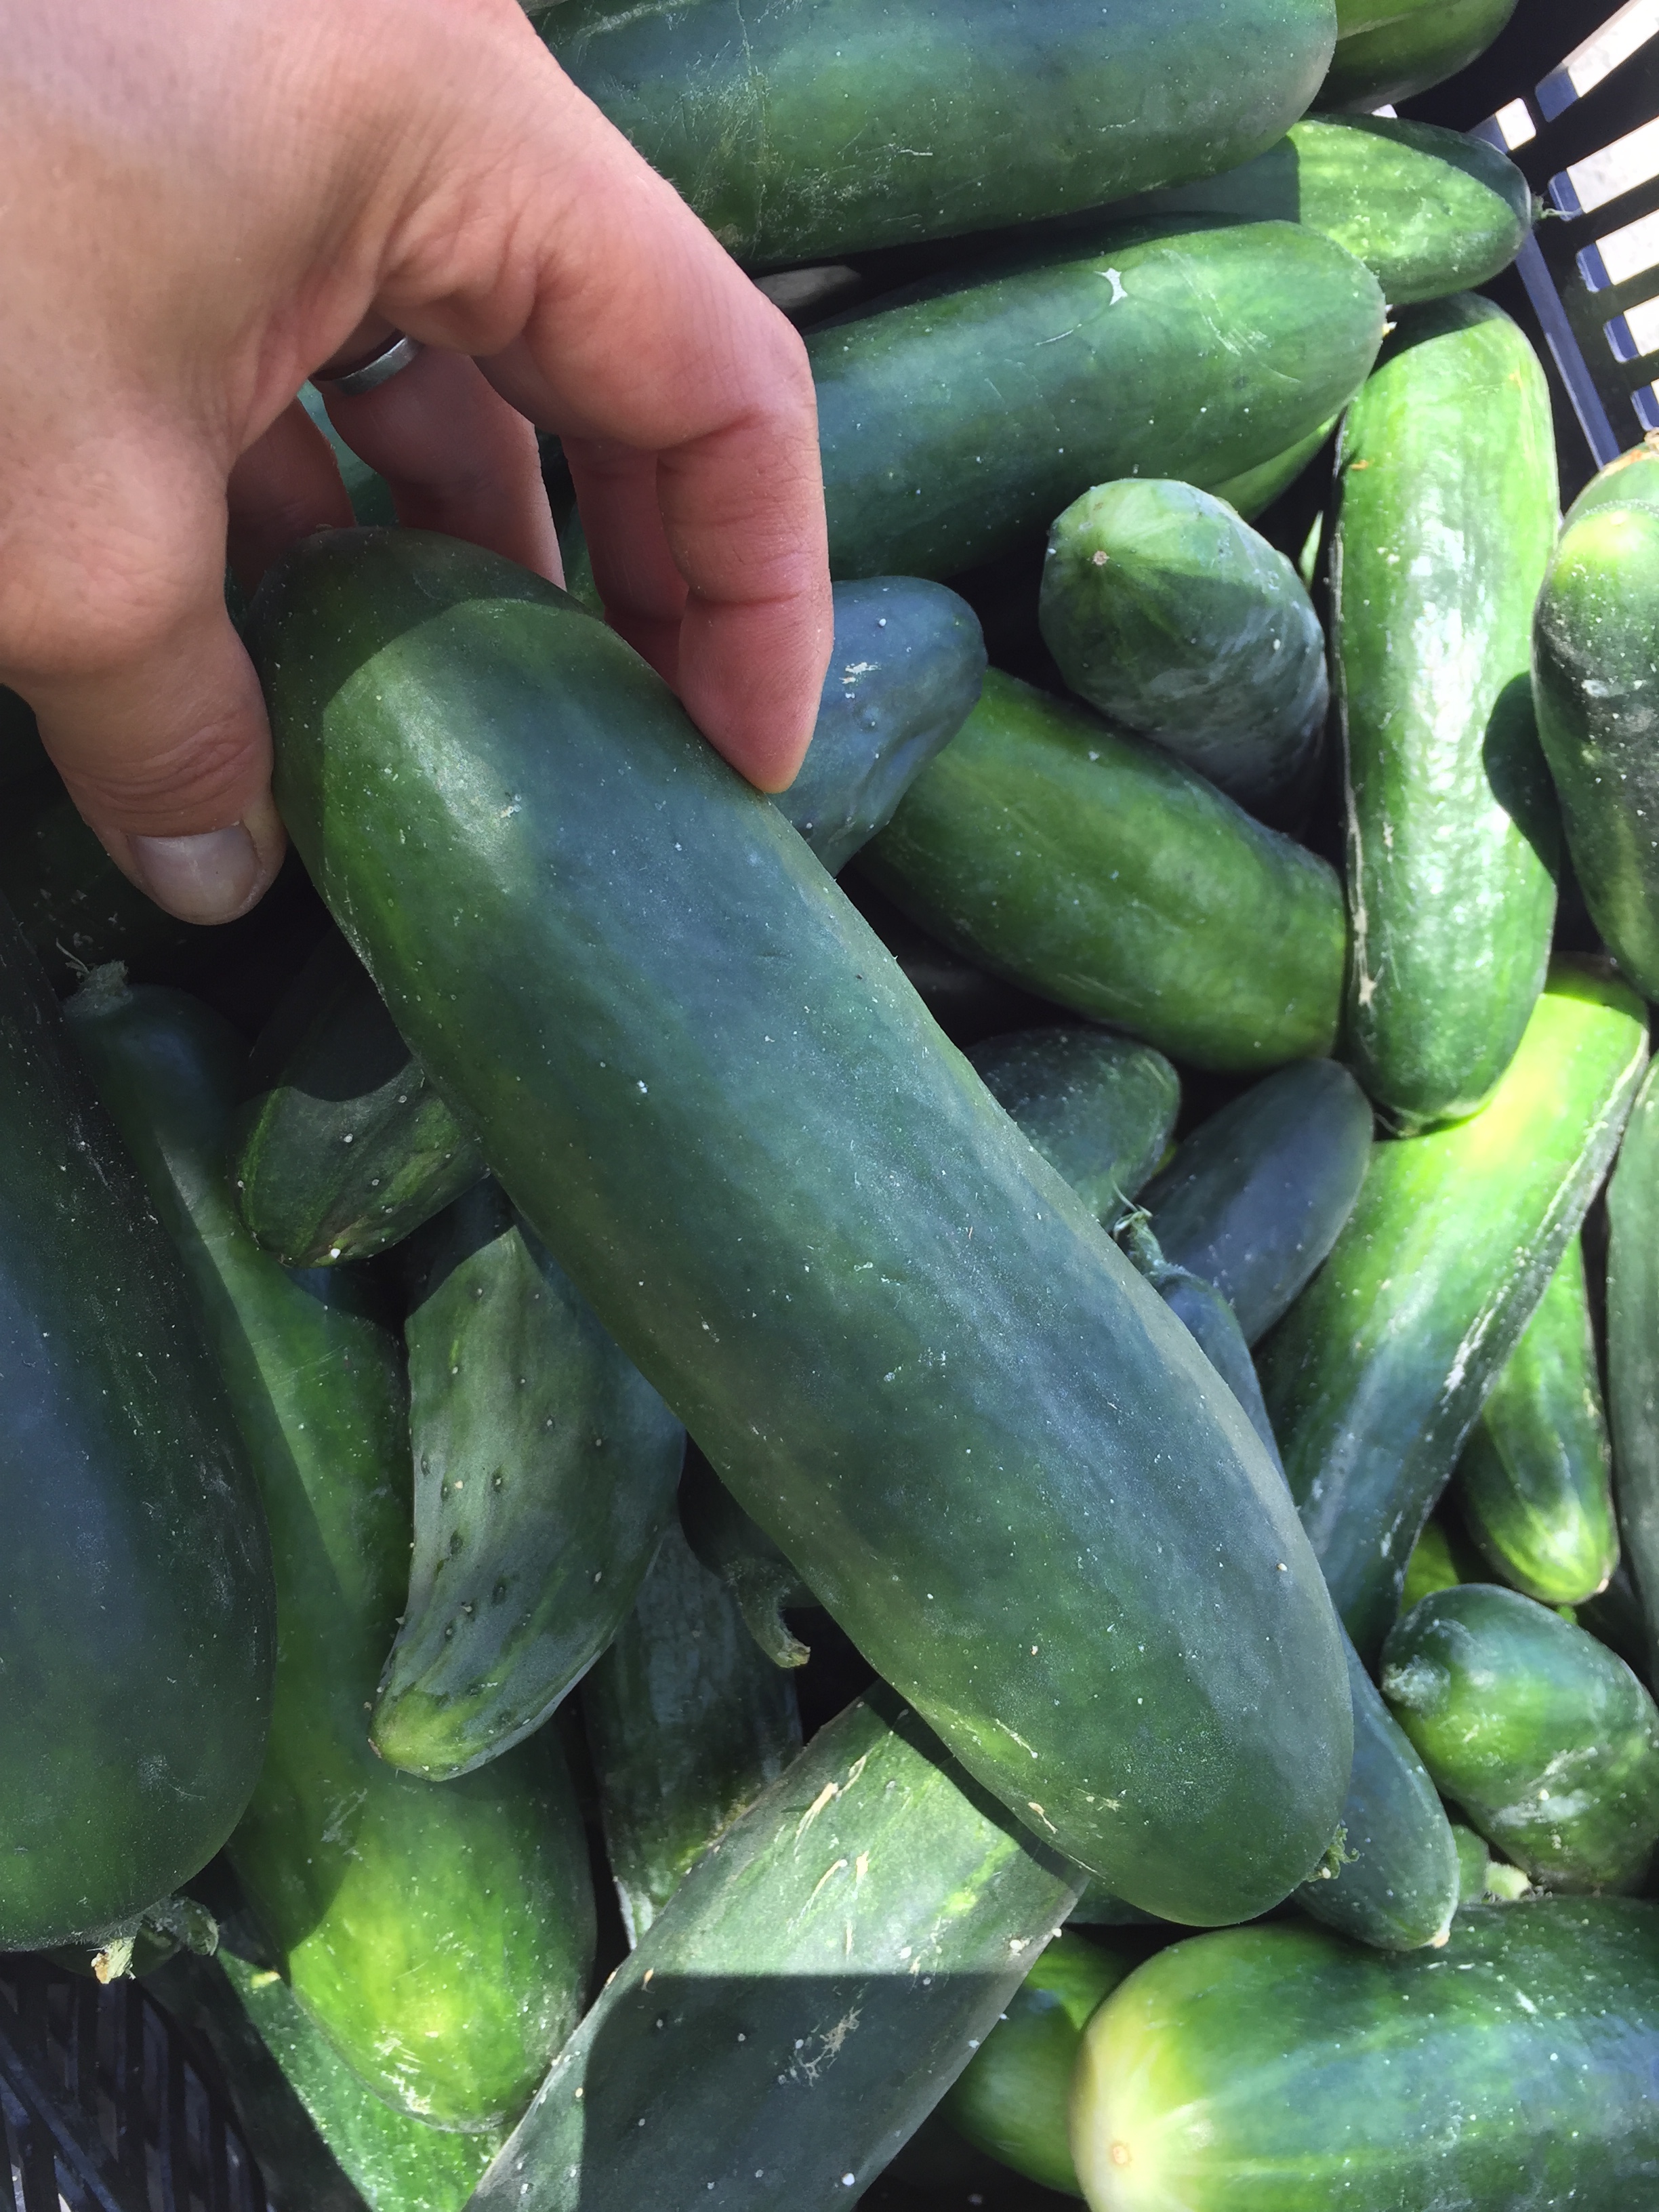 Cucumbers from HeartBeet Farms